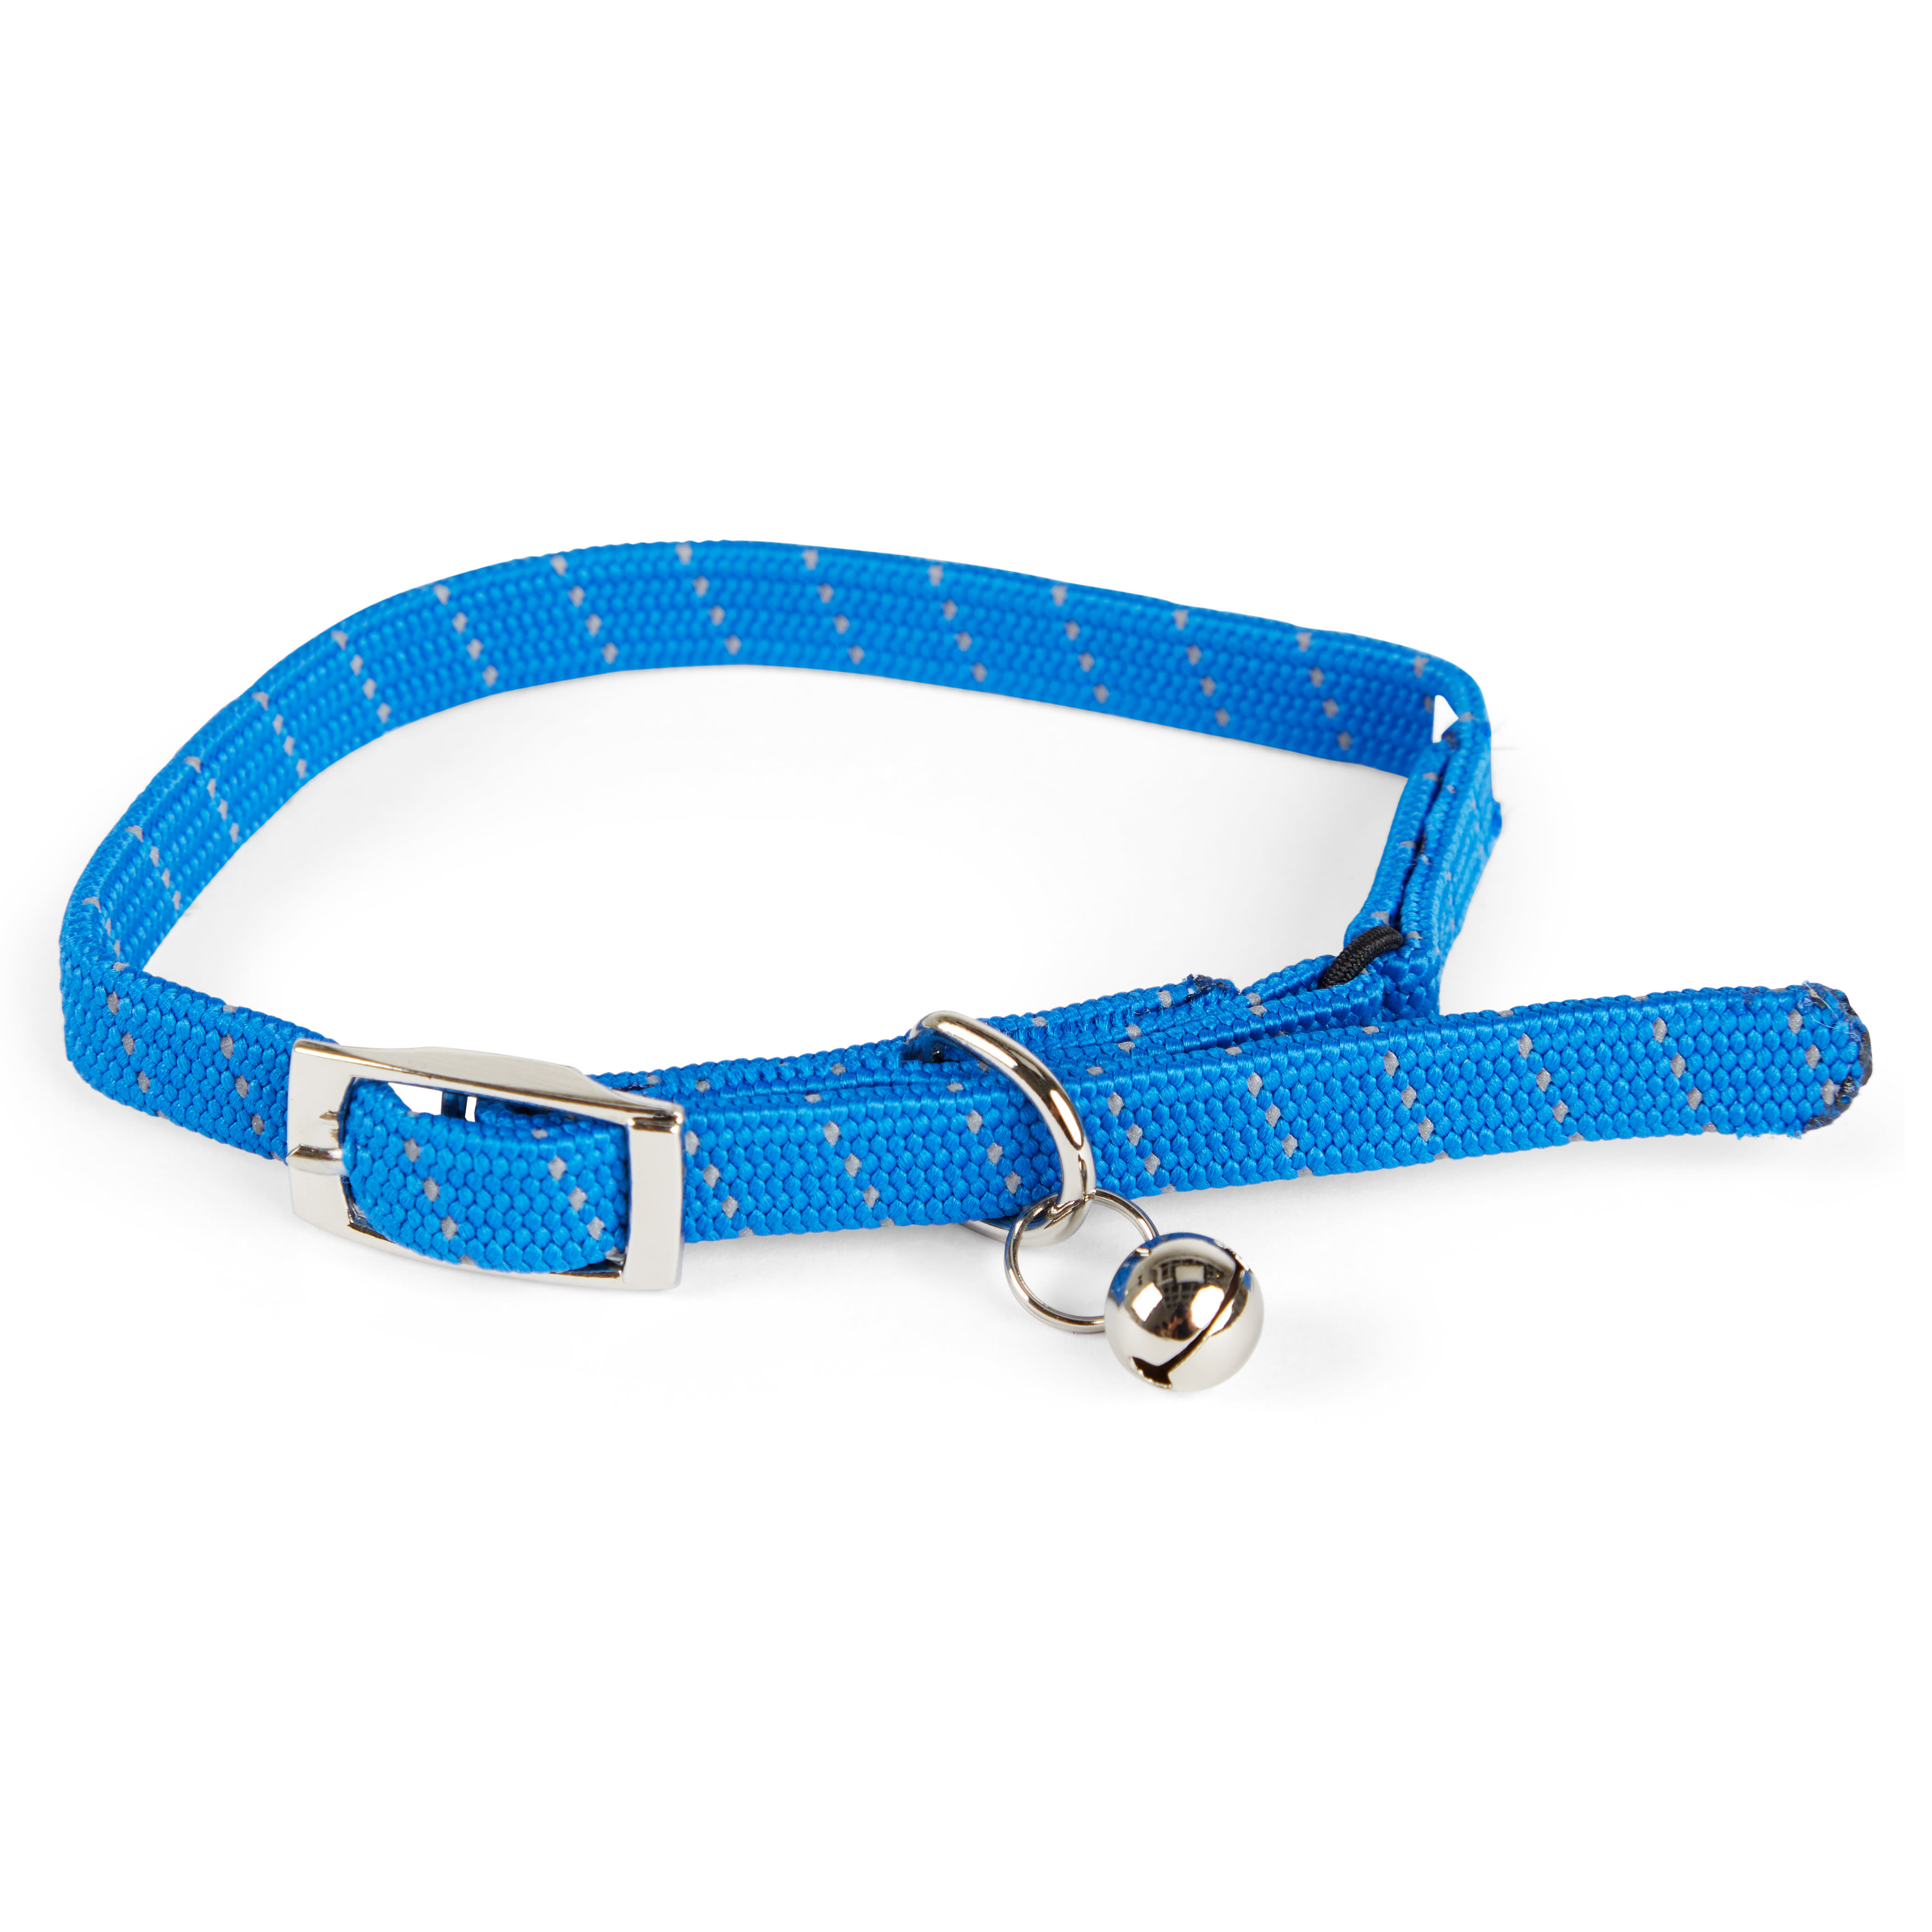 Cat Harness Small Dog Leash Adjustable Kitten Harness Blue Xs Reflective  Cat Harness Collar Breathable Vest For Rabbit, European Cat, Maine Coon,  Pers